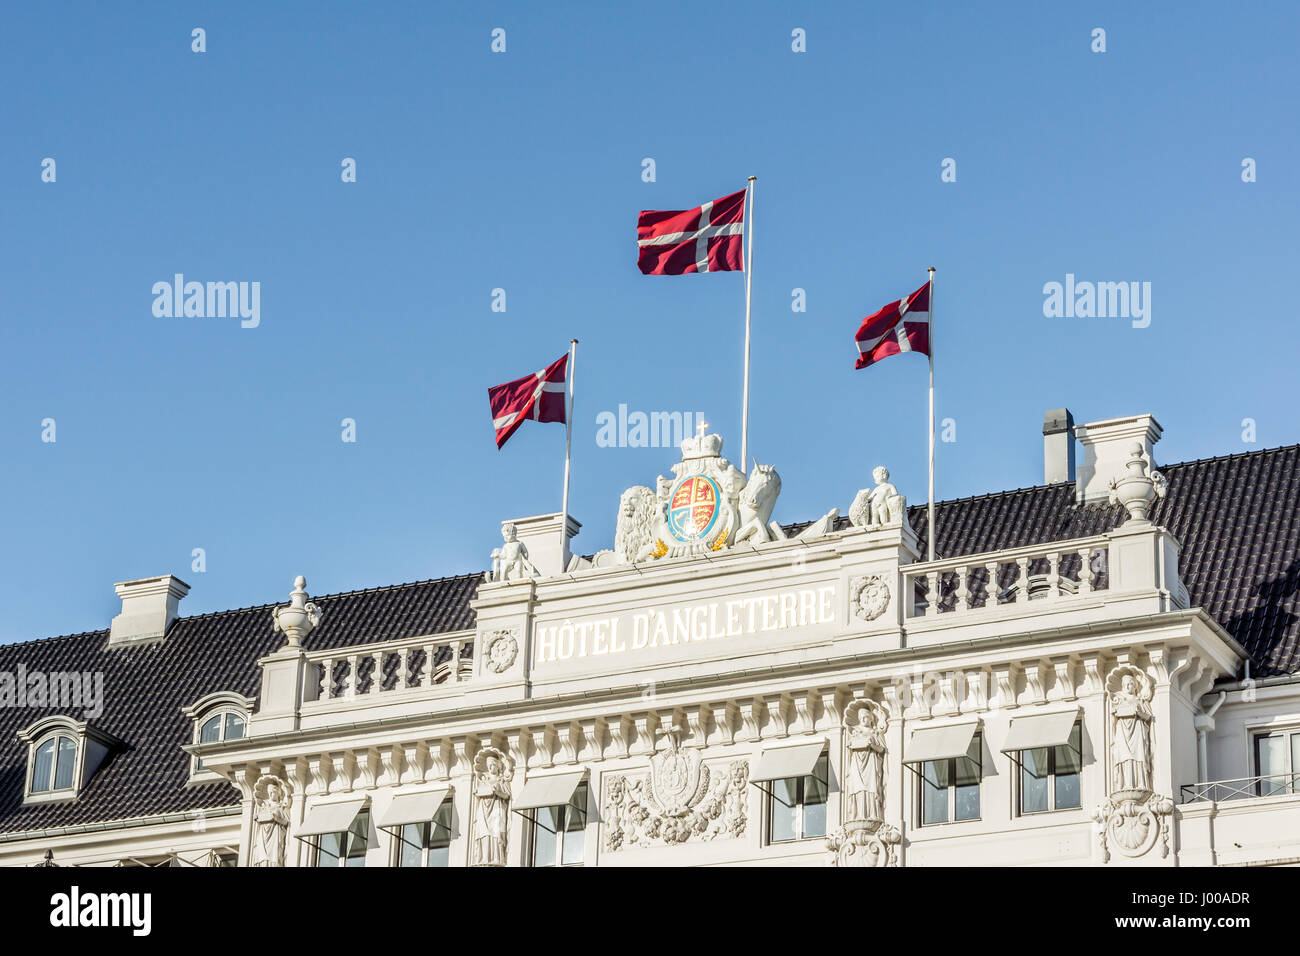 Flags flying in the wind on the Facade of the Hotel D´angleterre in Copenhagen, Denmark - April 6, 2017 Stock Photo